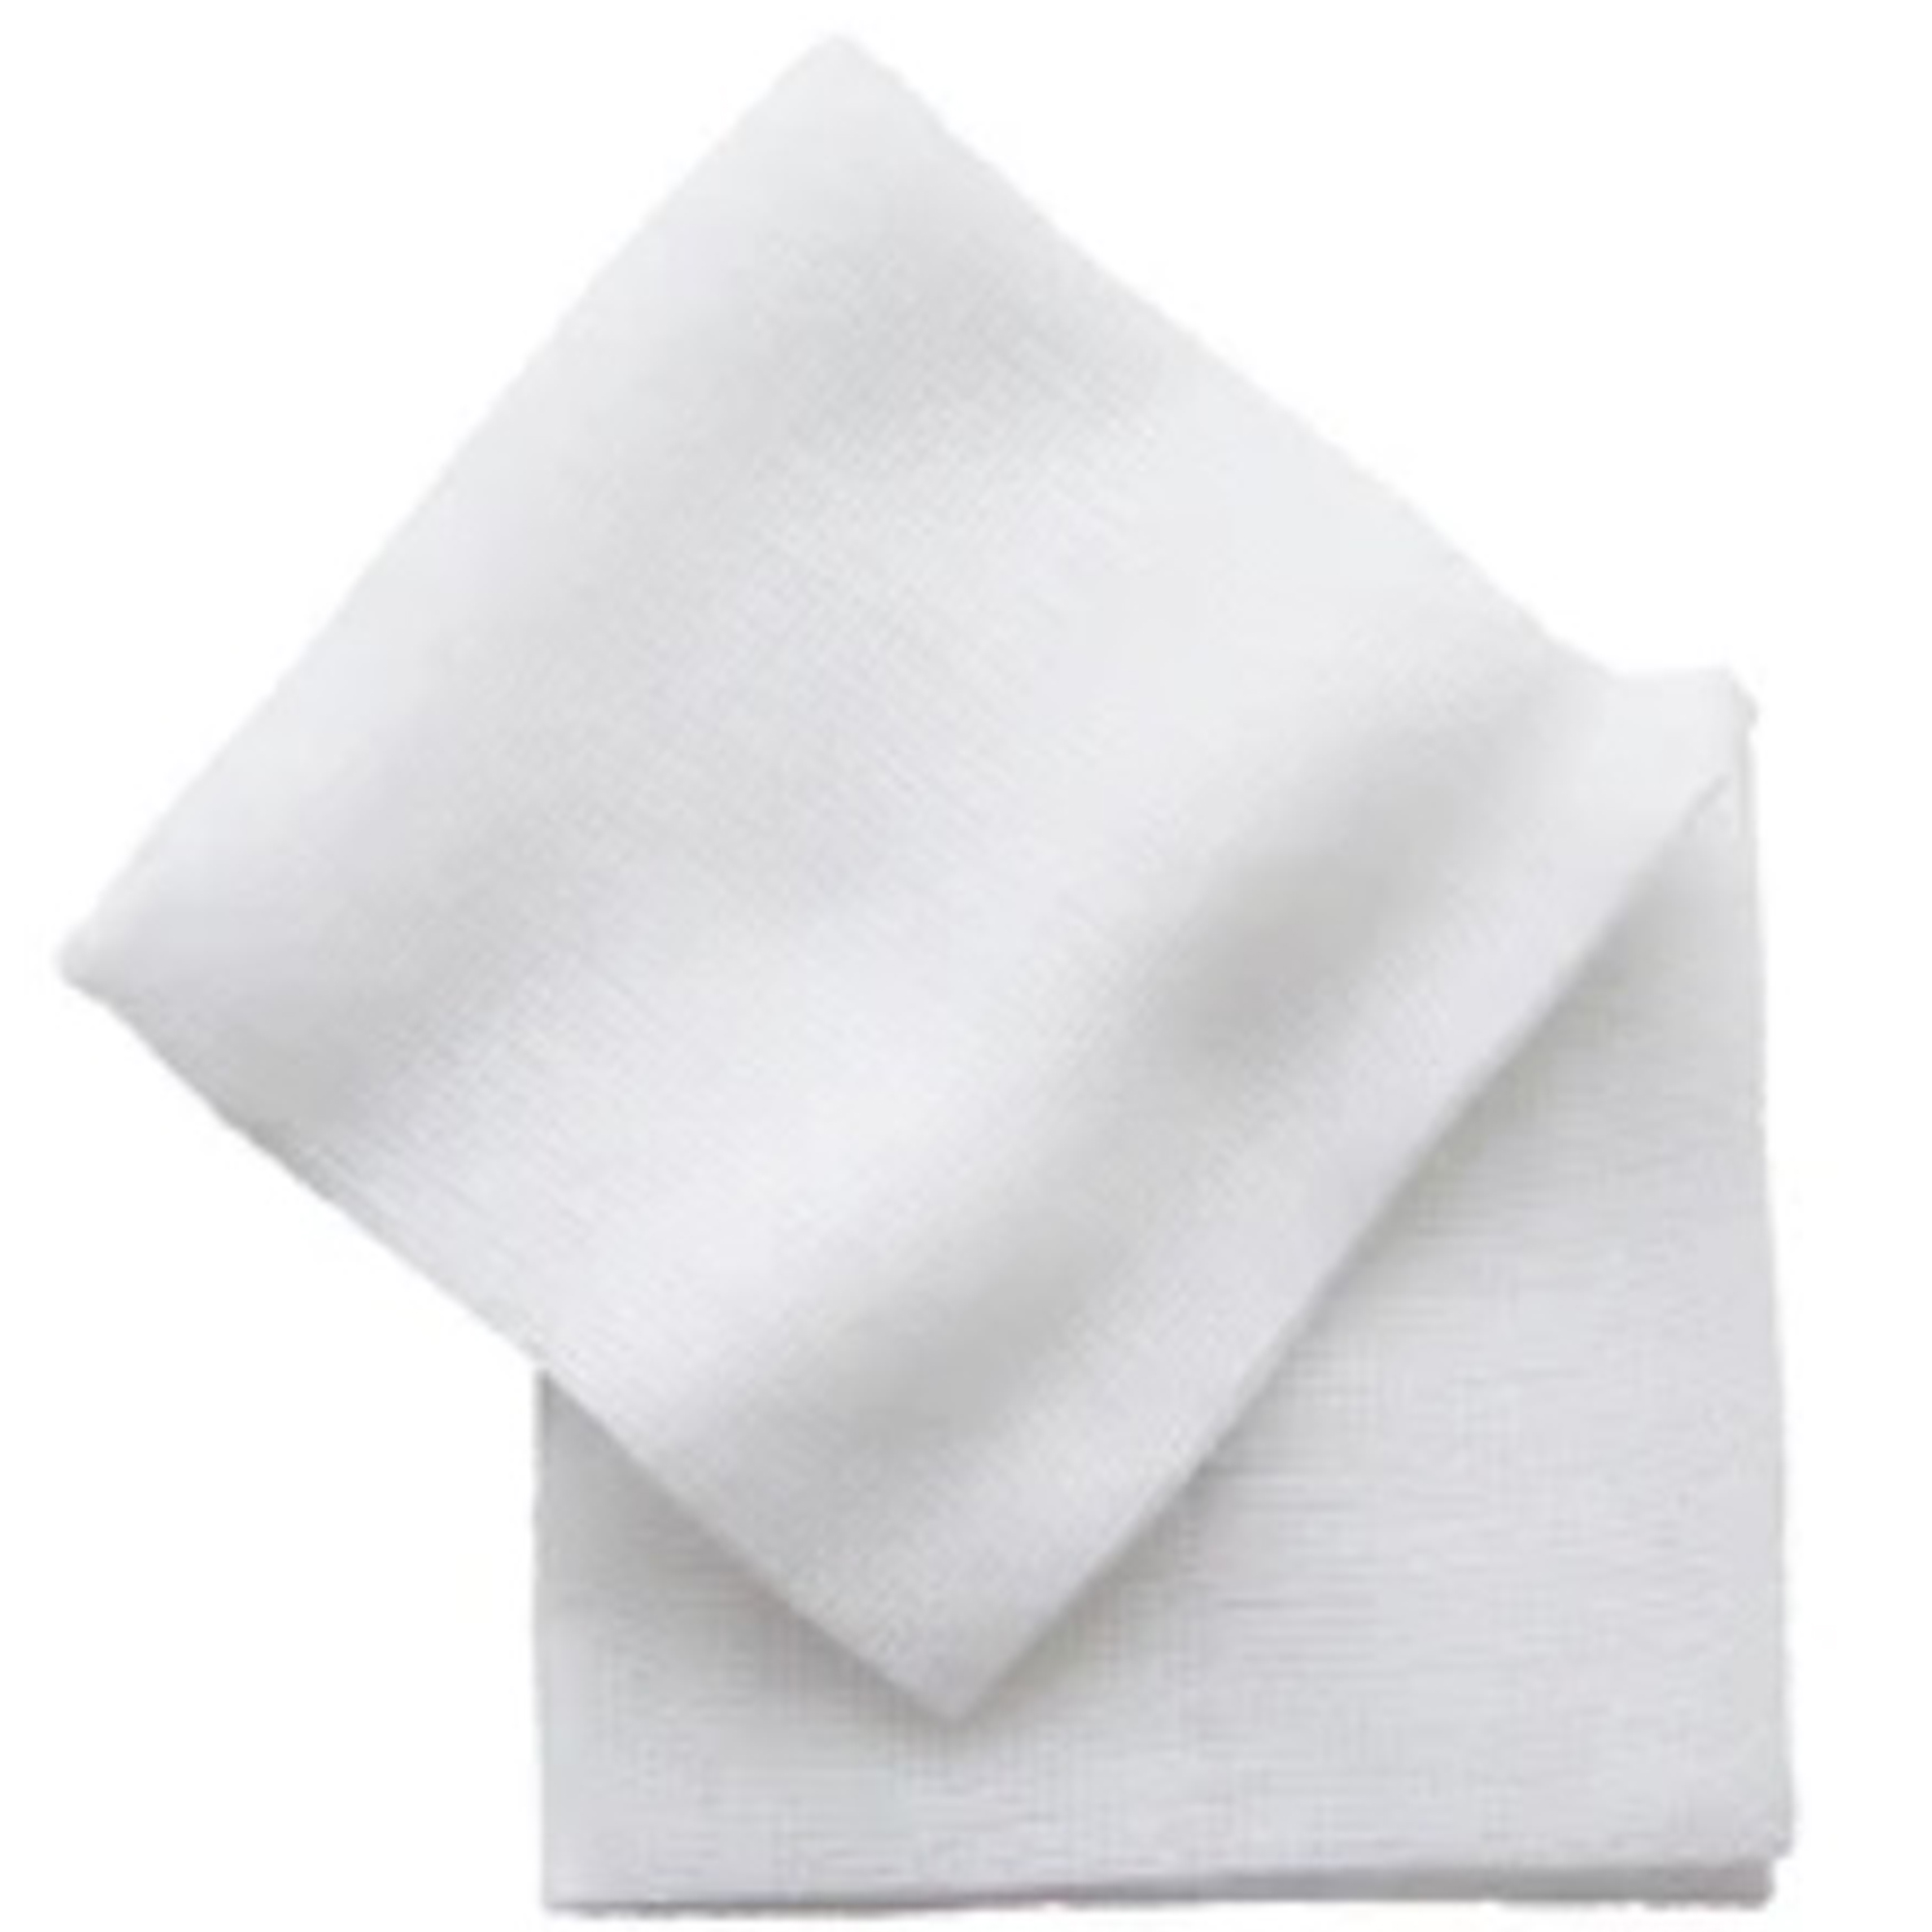 Veterinary/GAUZE COMPRESSES, SWABS AND BANDAGES/Non-woven Veterinary Gauze Swabs & Alcohol pads